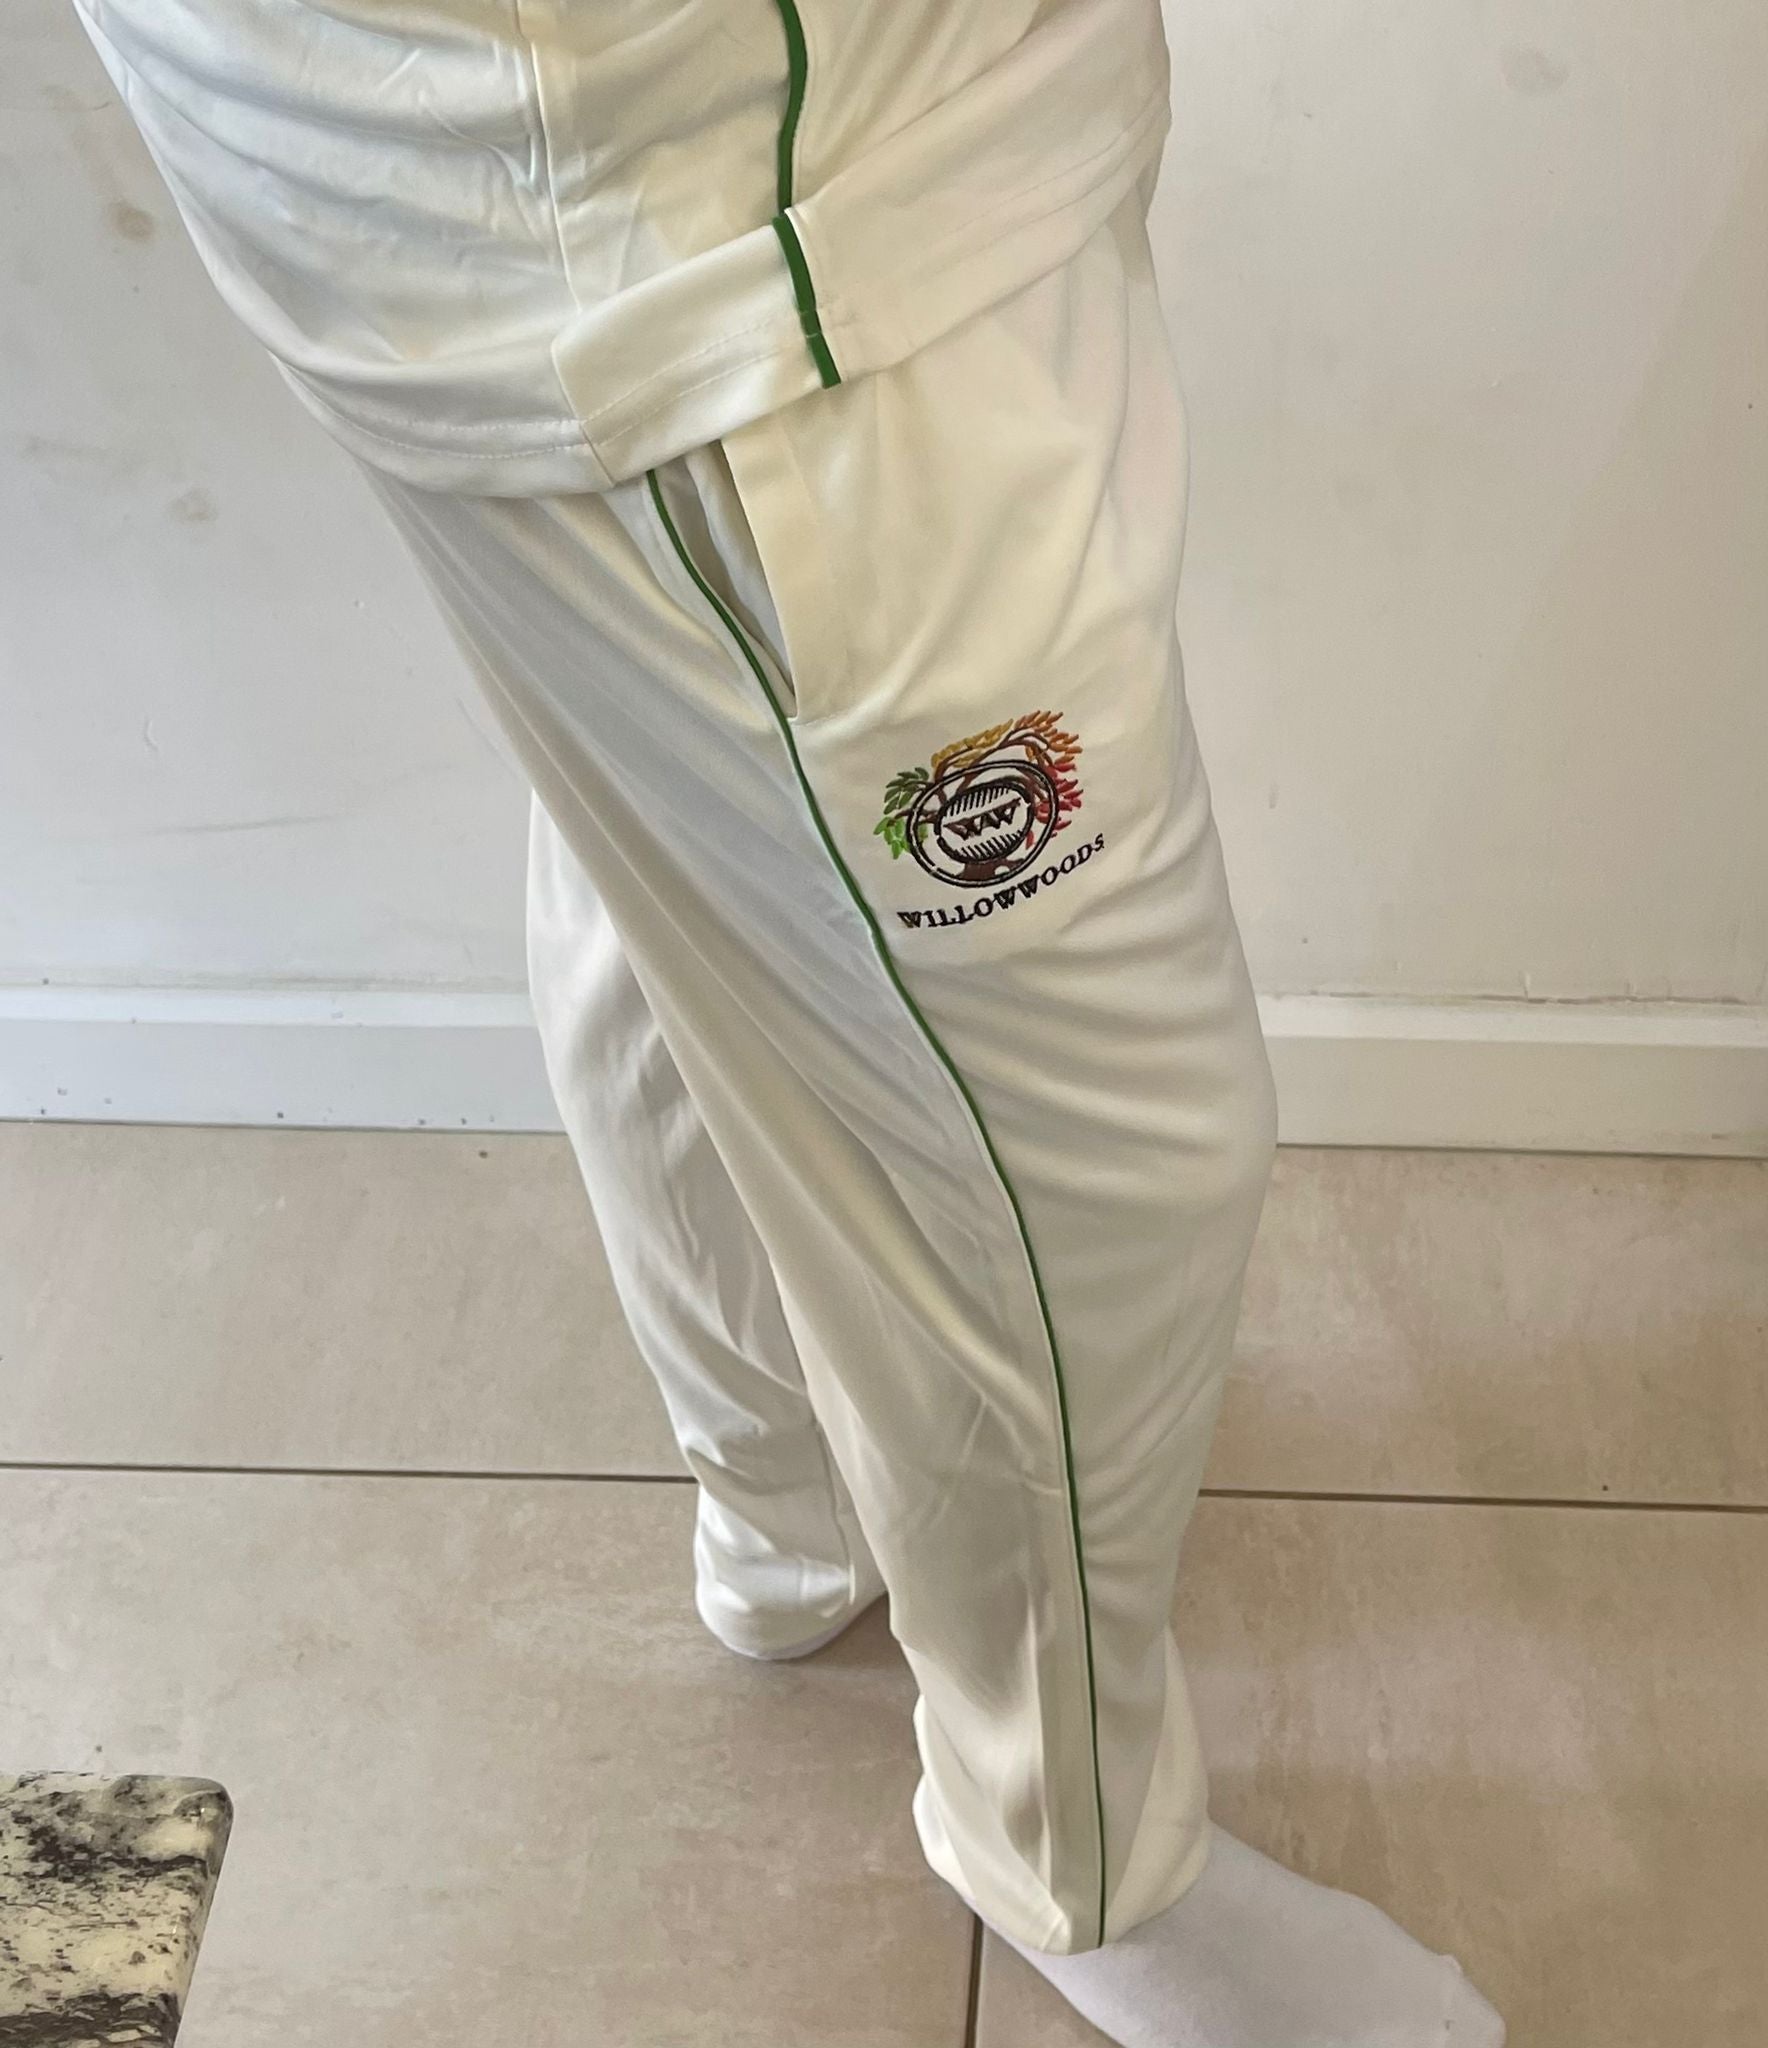 Cricket Trousers Manufacturers Custom Cricket Team Trouser Suppliers USA